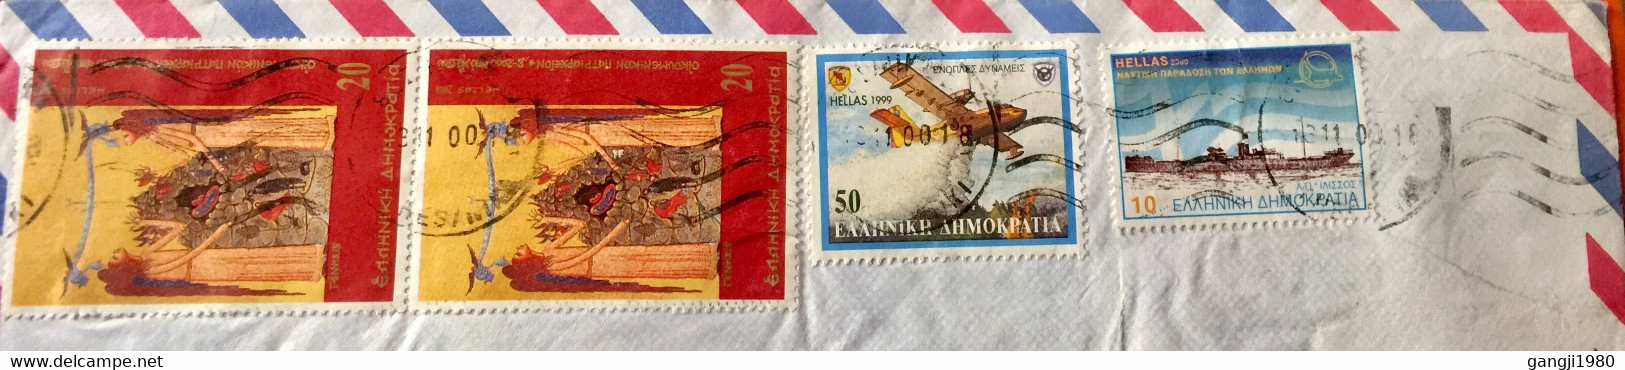 GREECE 2000, USED AIRMAIL COVER TO INDIA,4 STAMPS ,SHIP ,AEROPLANE,ART, PAINTING,WOMEN,GIRLS,THESSALONIKI,CANCELLATION - Briefe U. Dokumente